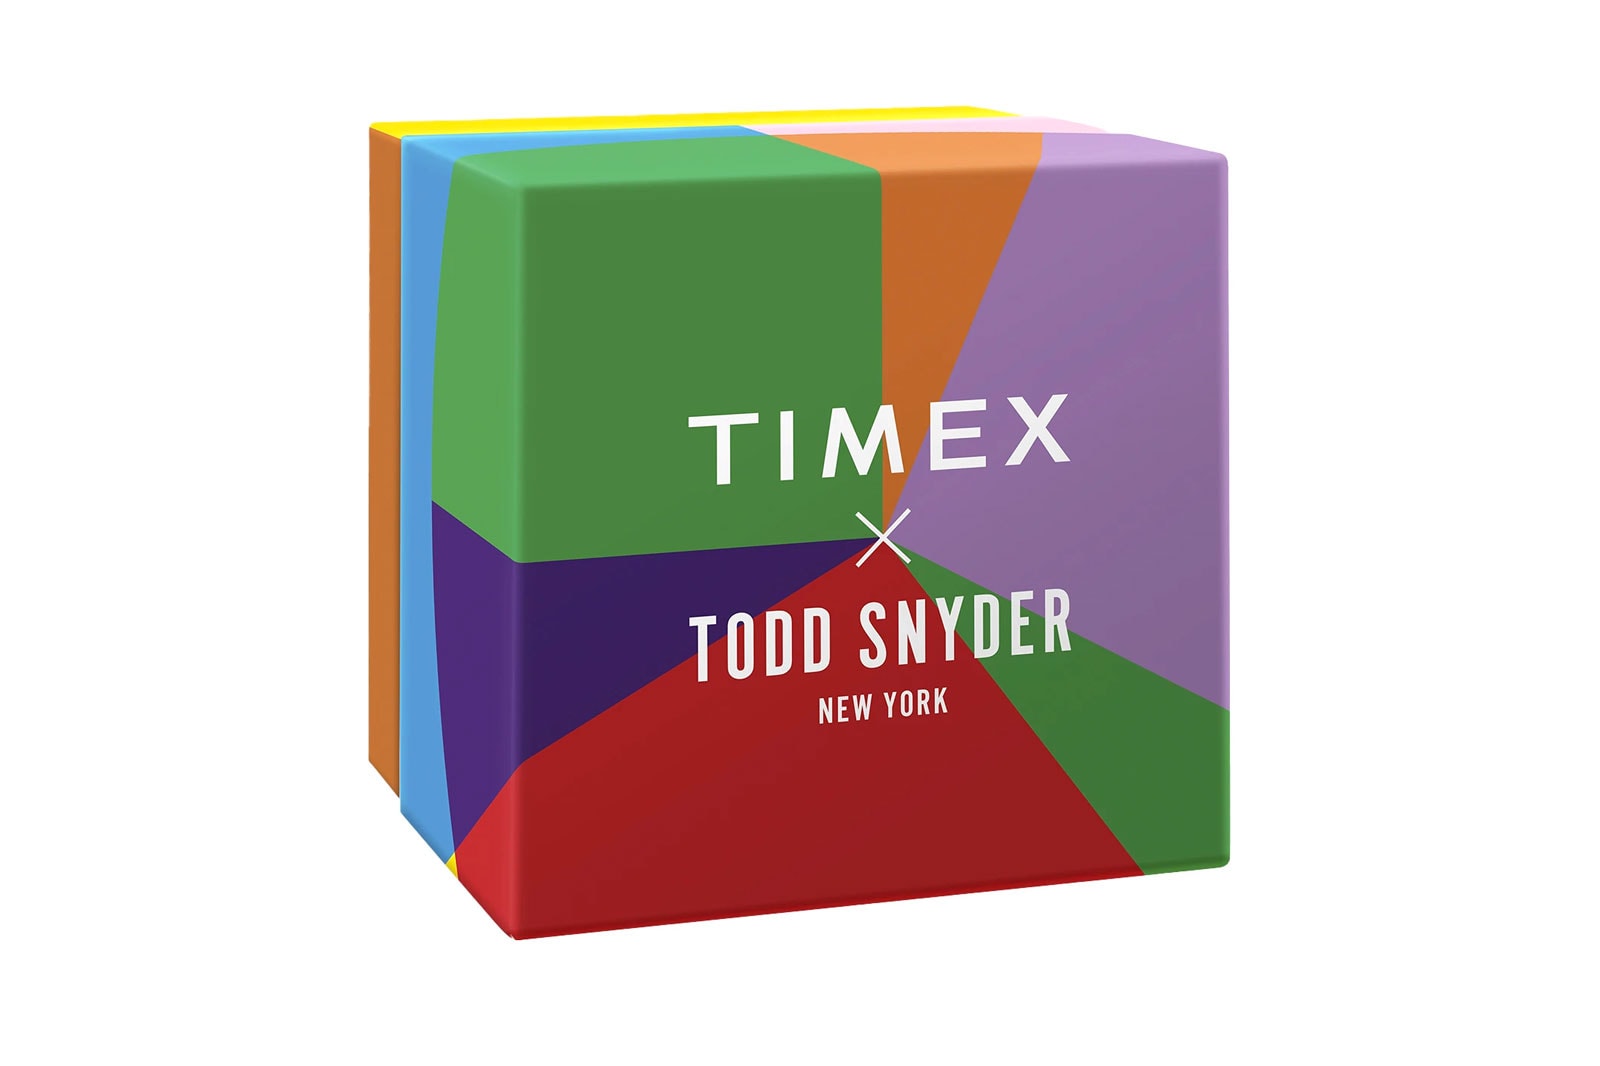 Todd Snyder x Timex Pride Month Watch LGBTQ+ Pride week Pride Month colors Gilbert Baker watches accessories 